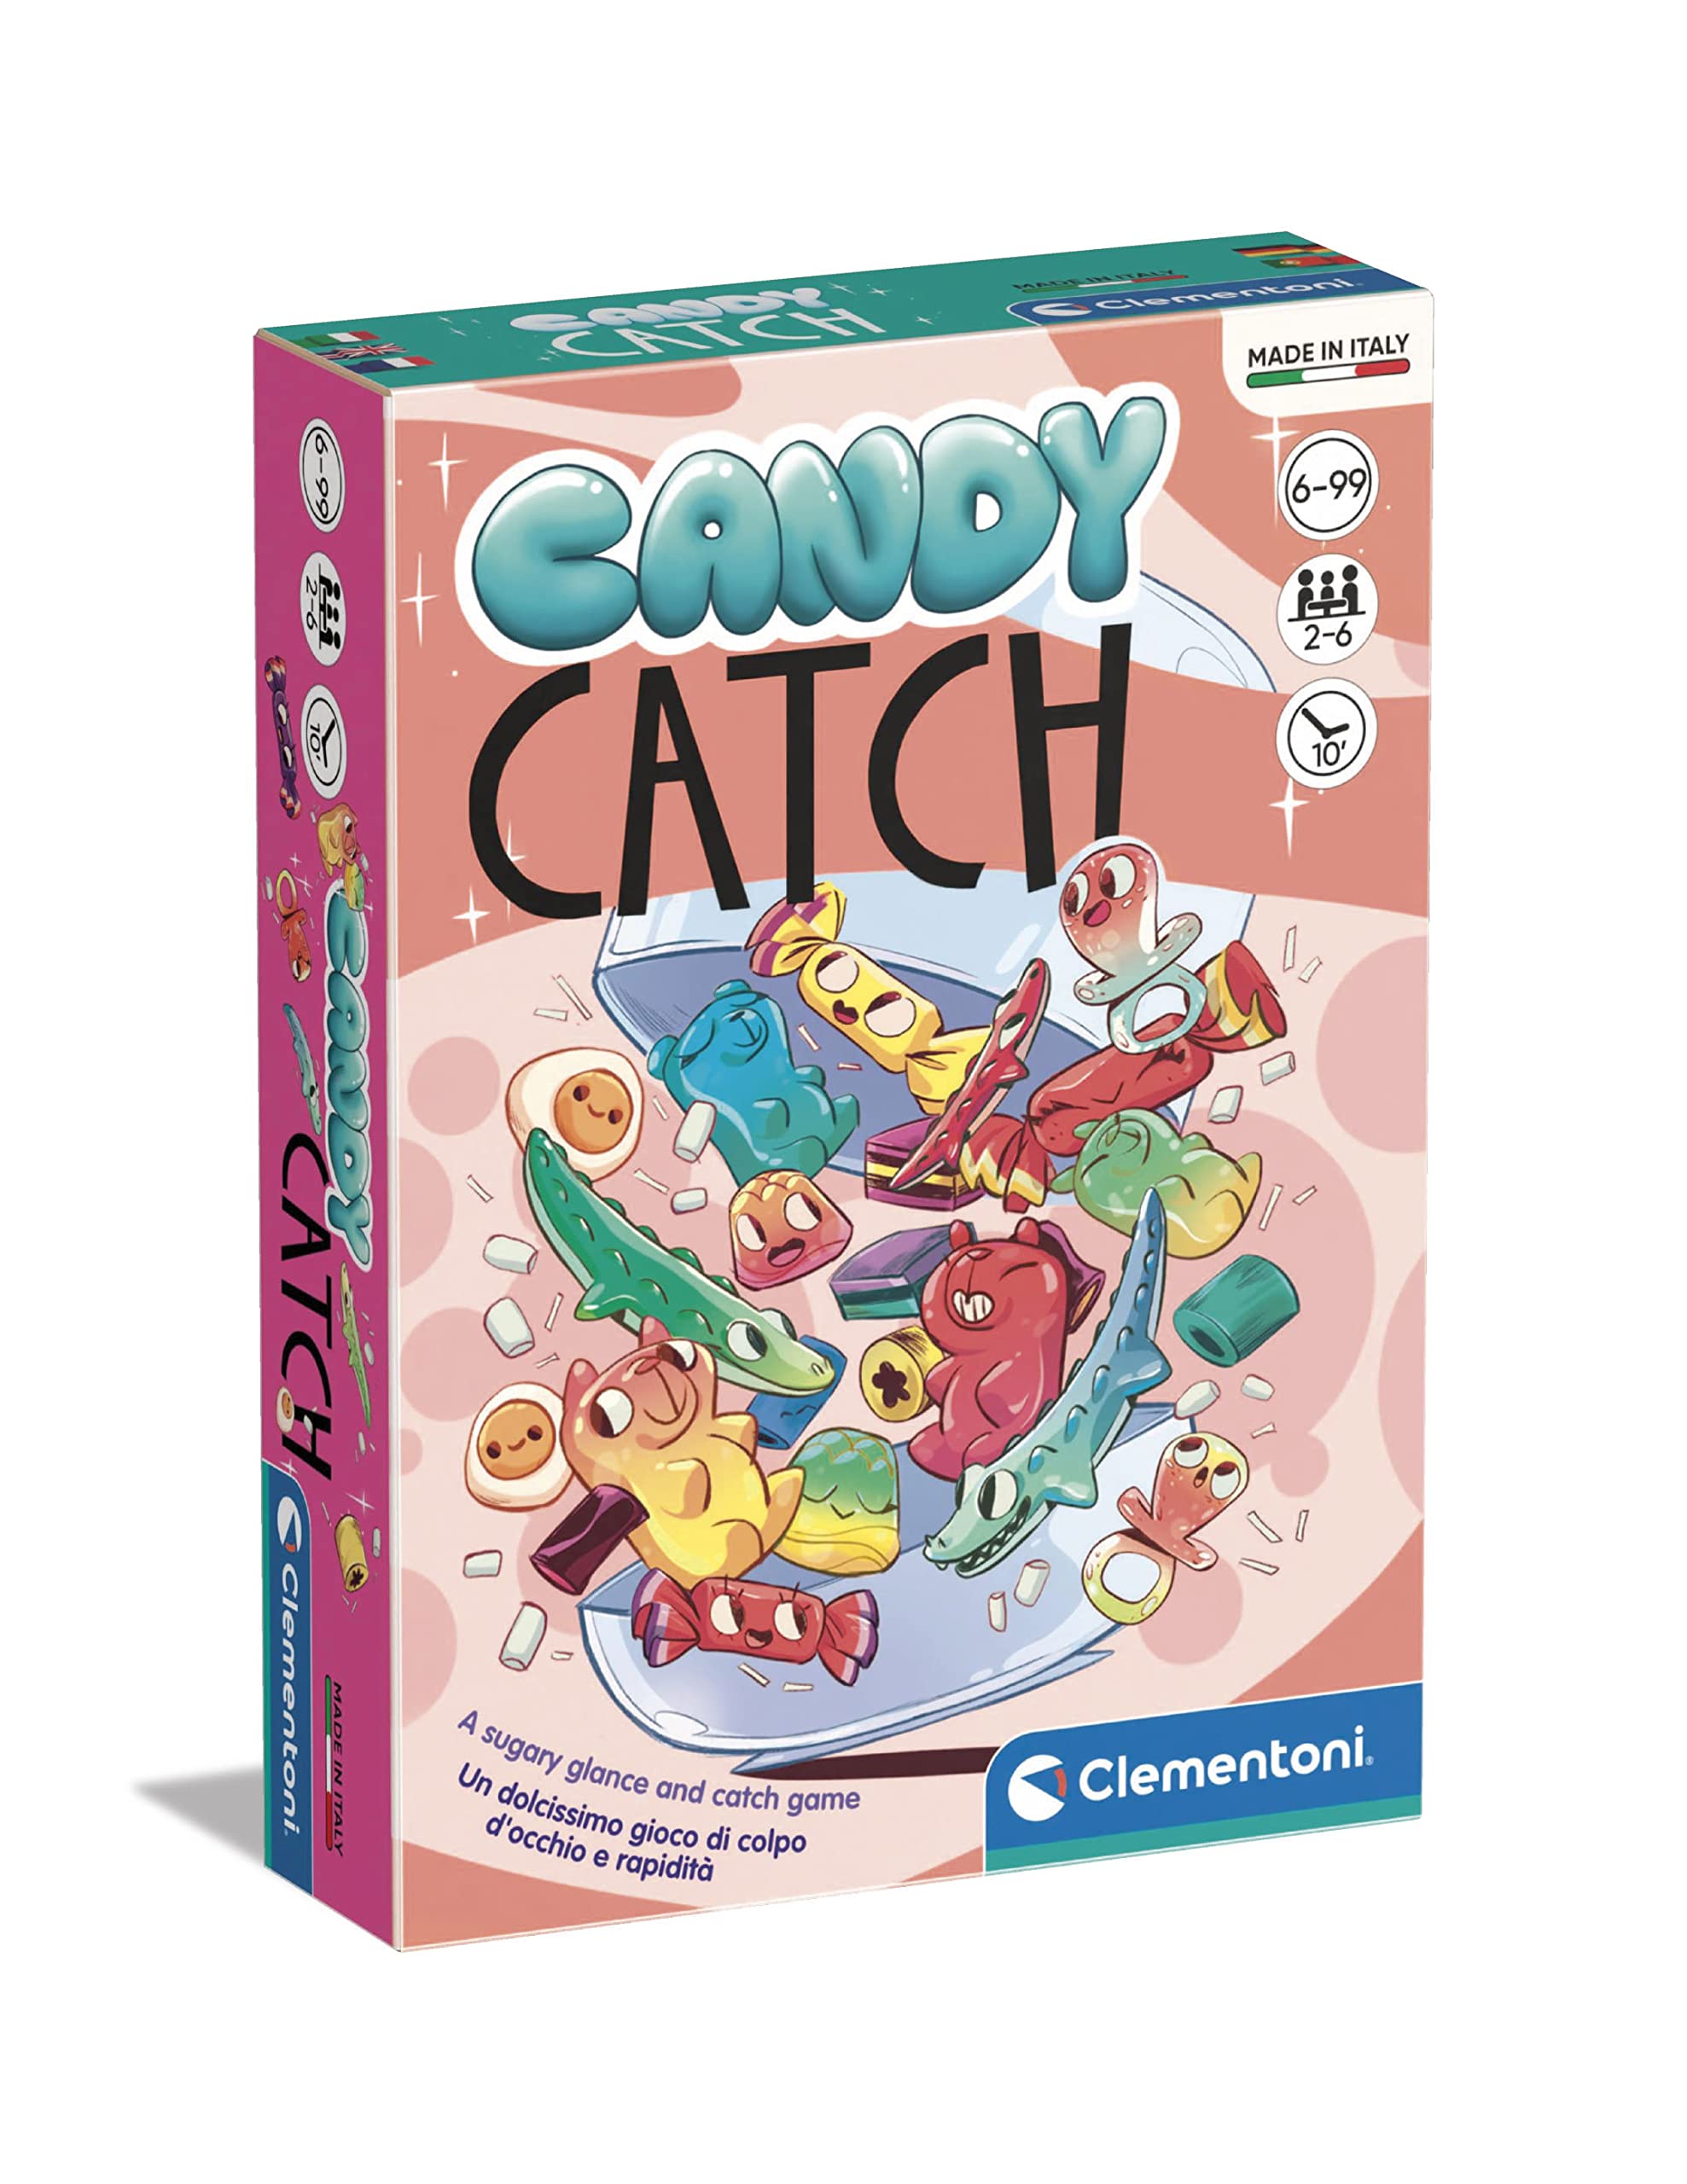 Clementoni 16565, Clementoni Pocket Games - Candy Catch for Children and Adults, Ages 6 Years Plus